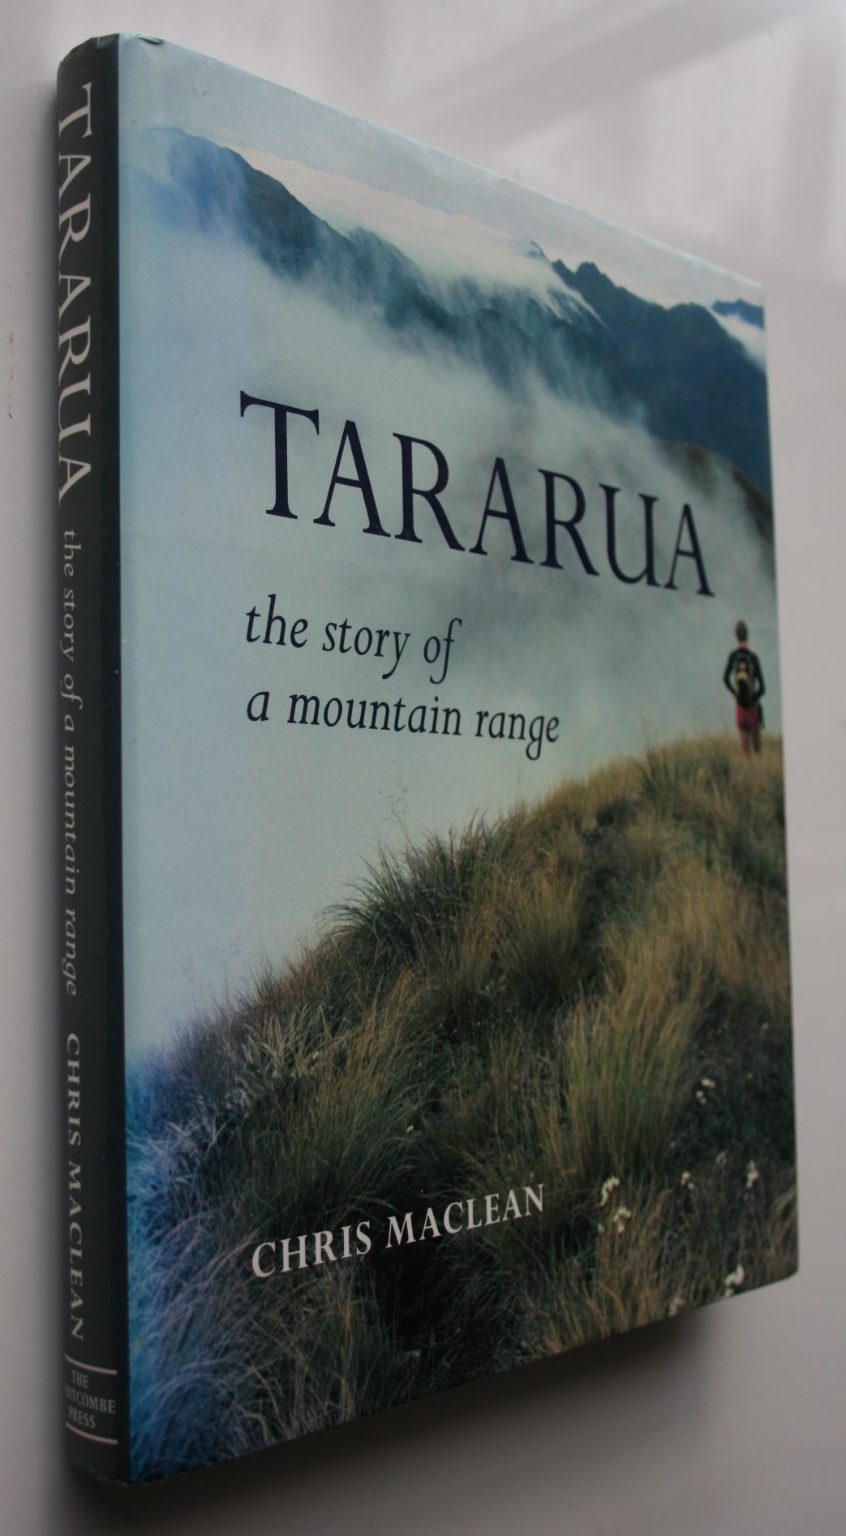 Tararua the Story of a Mountain Range. SIGNED by Chris Maclean